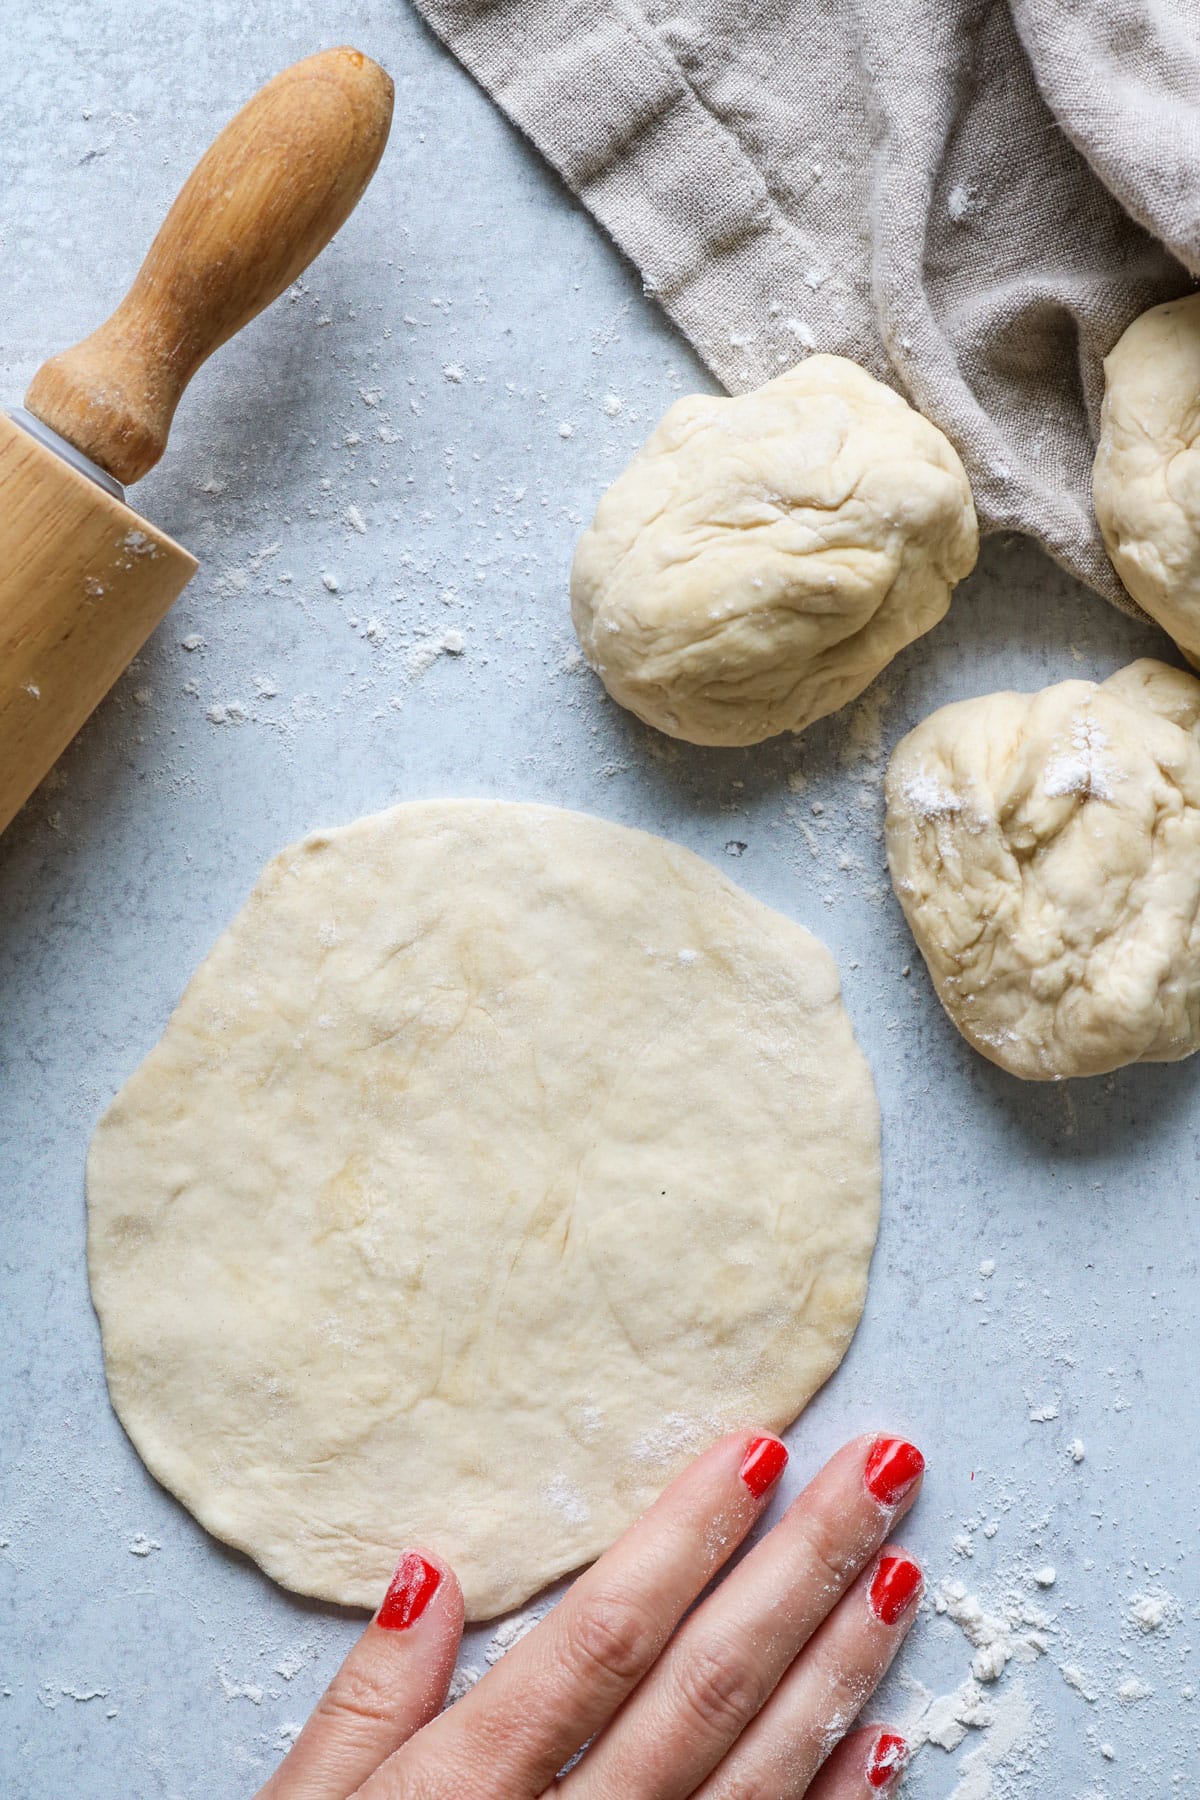 Flatbread dough rolled out into circles.